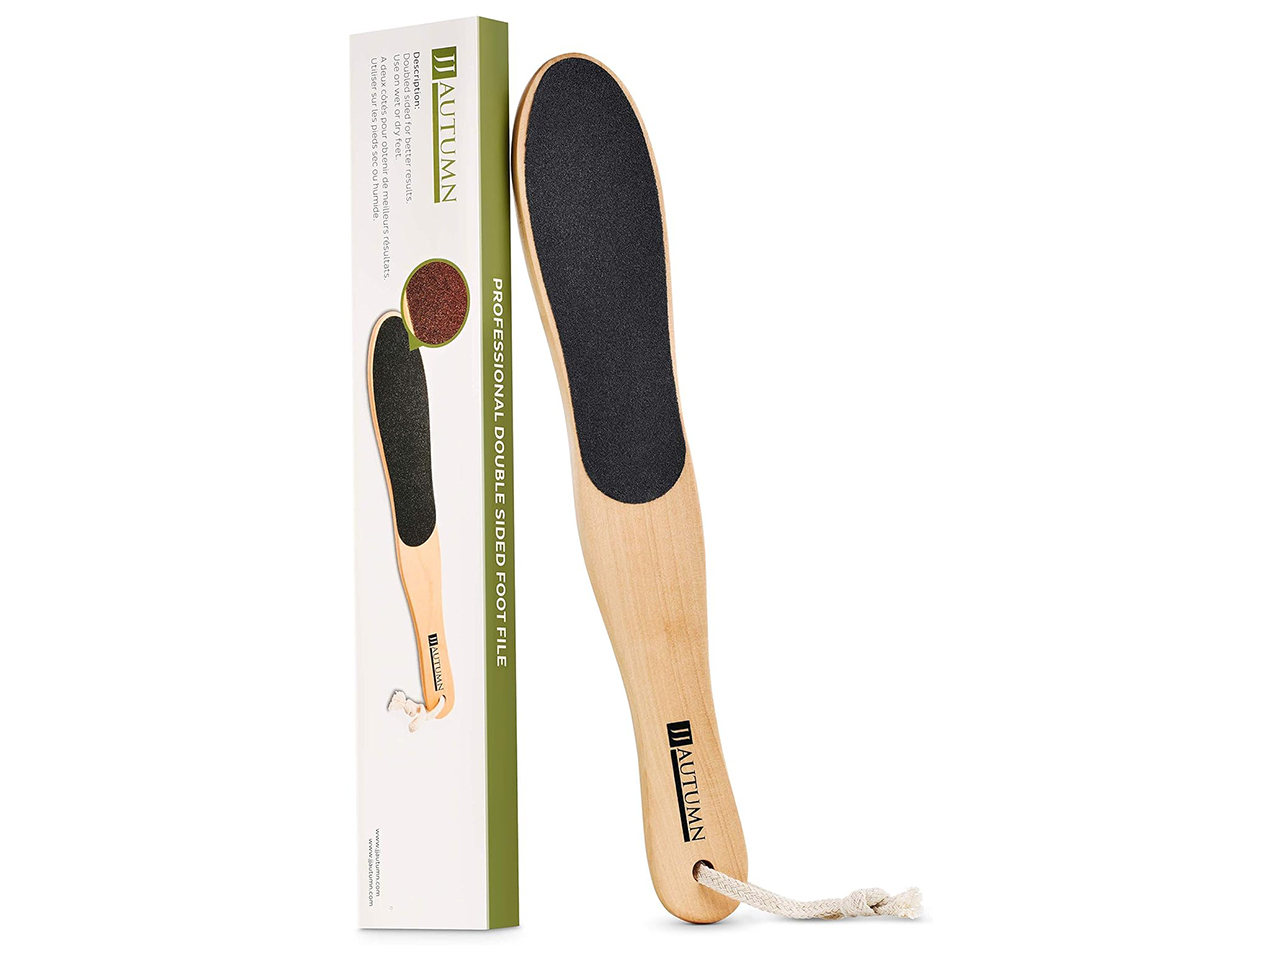 JJ Autumn Double-Sided Foot File, at-home pedicure